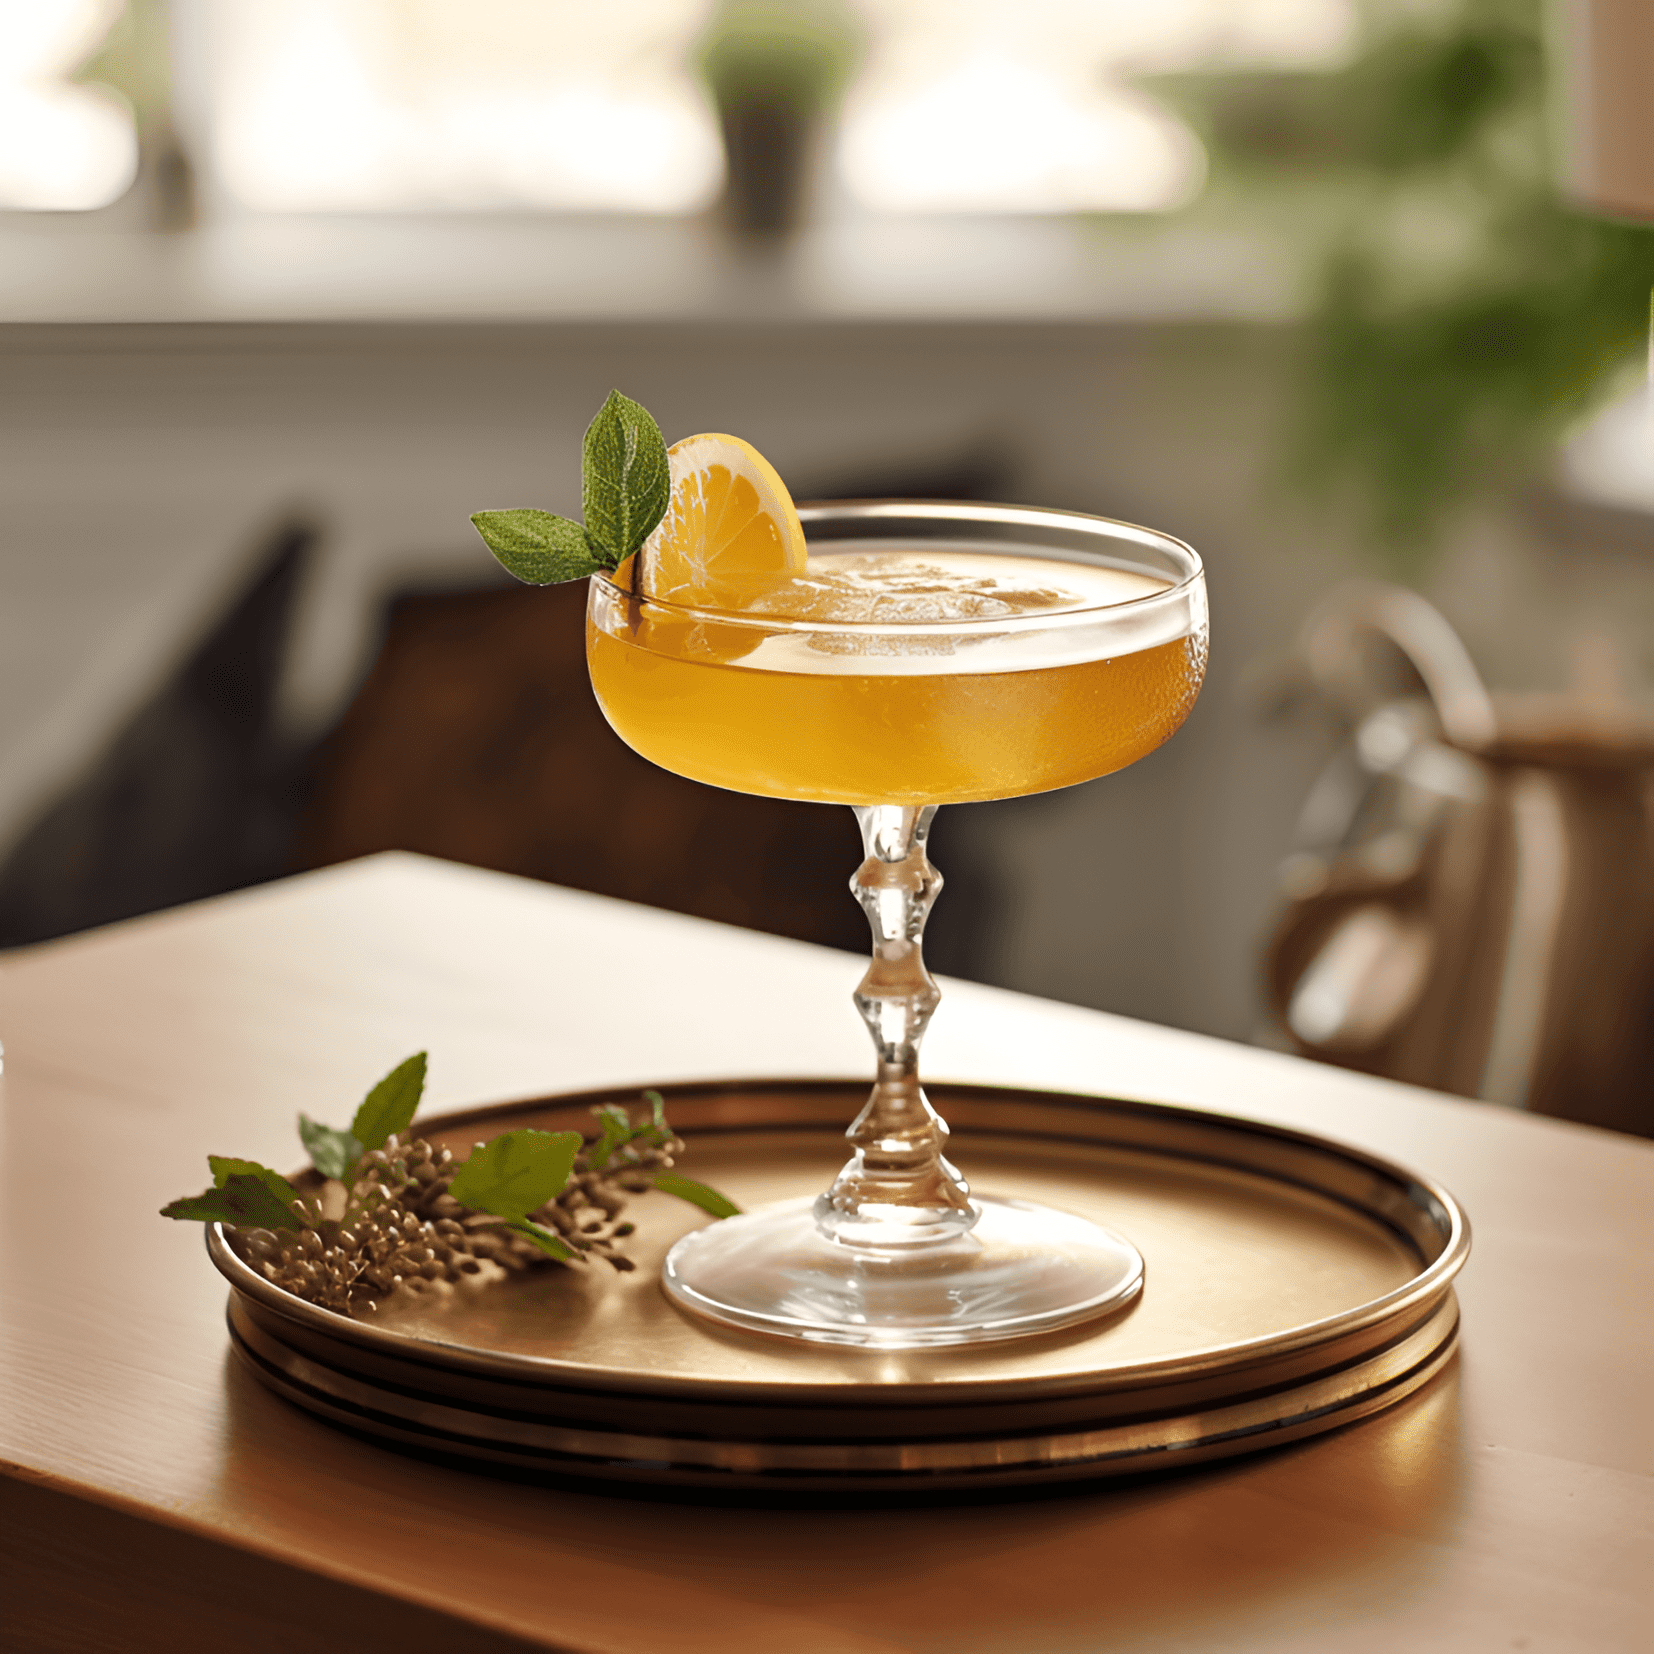 Windsor Cocktail Recipe - The Windsor Cocktail has a complex and sophisticated taste, with a perfect balance of sweet, sour, and bitter notes. It is smooth and velvety, with a hint of warmth from the whiskey and a refreshing citrus kick from the lemon juice.